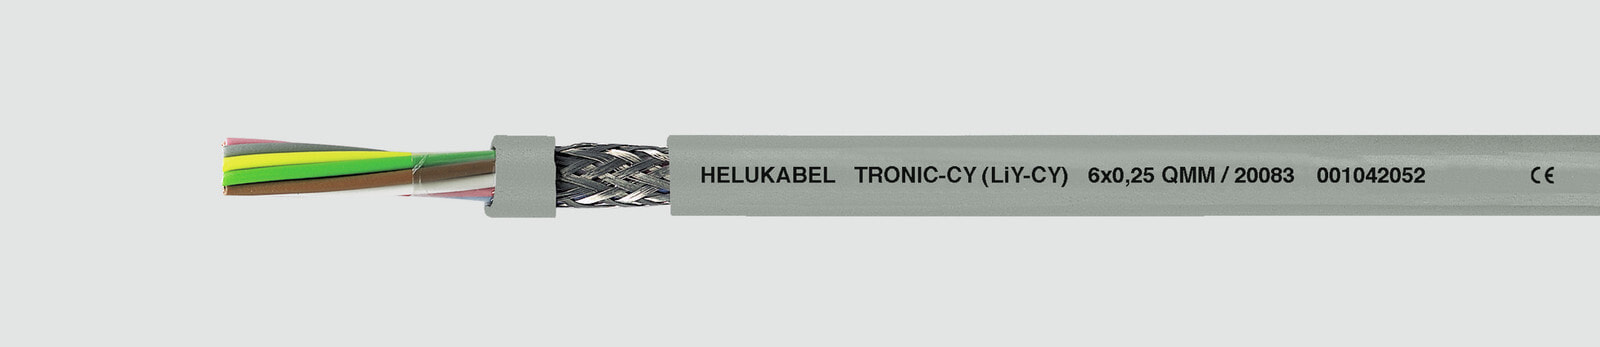 Helukabel TRONIC-CY (LiY-CY) - Low voltage cable - Grey - Polyvinyl chloride (PVC) - Cooper - 0.5 mm² - 129 kg/km